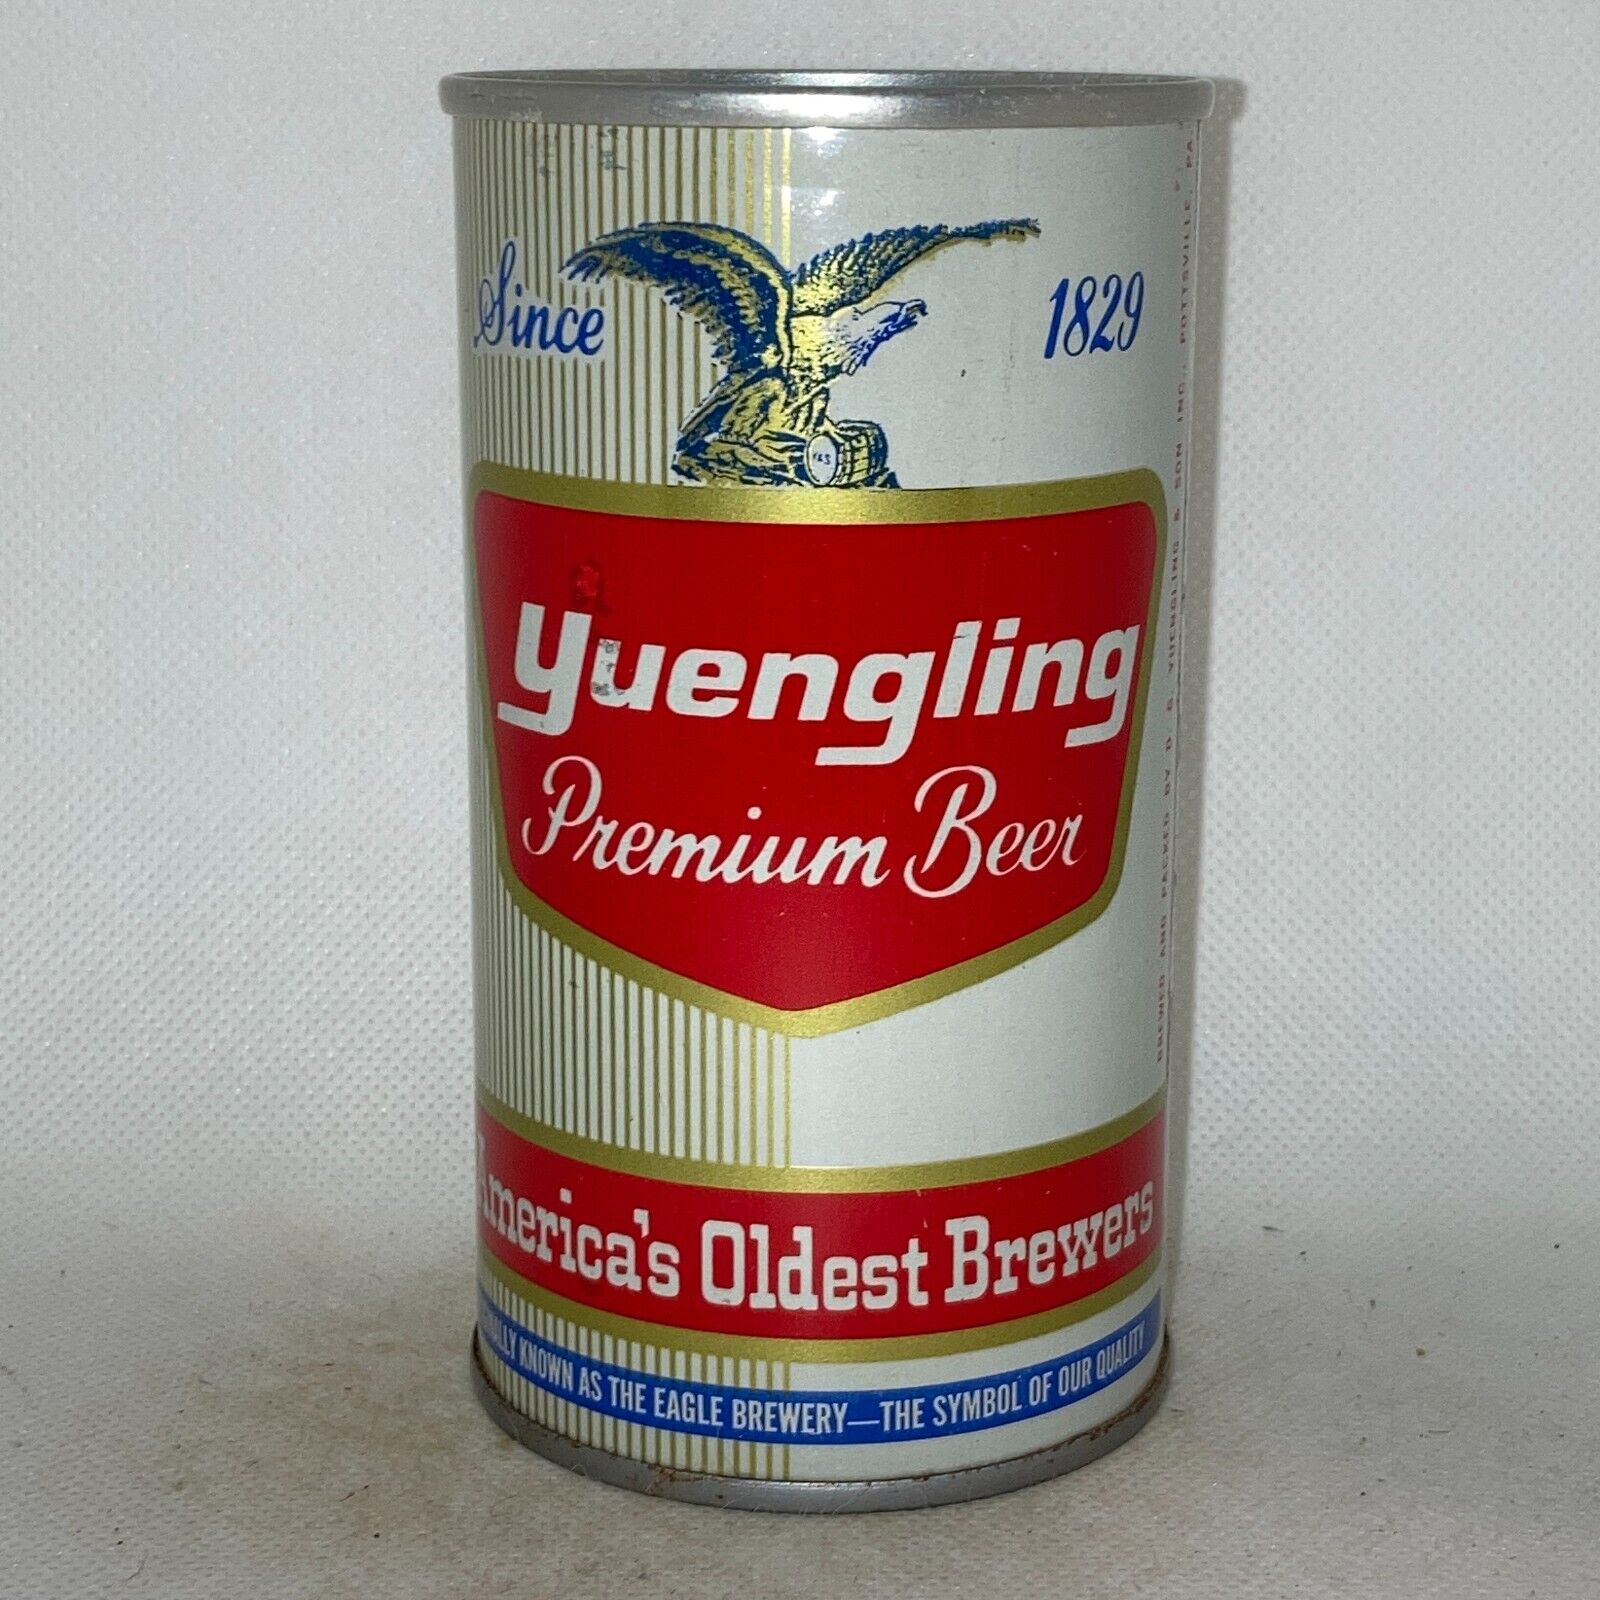 Yuengling beer can, bottom opened